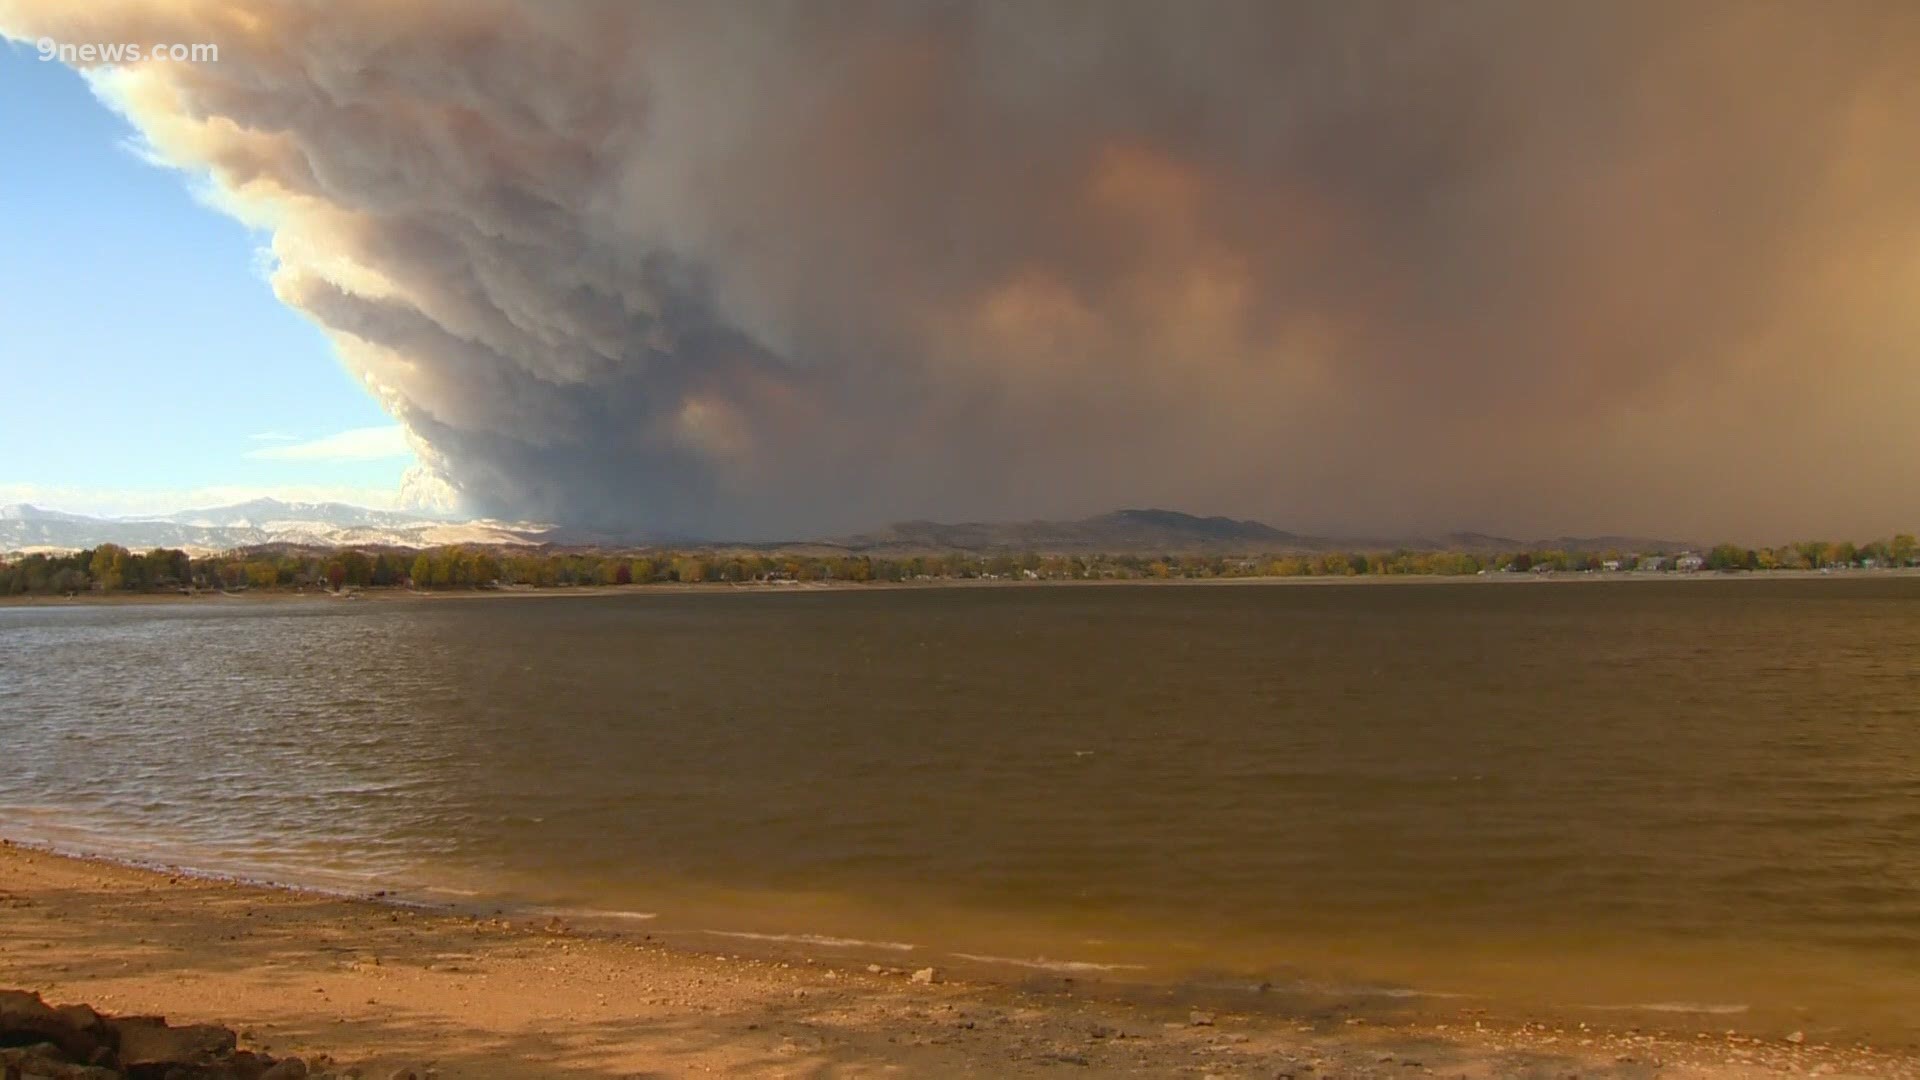 Officials have announced mandatory and voluntary evacuations Wednesday after the 135,556-acre fire flared up west of Fort Collins.